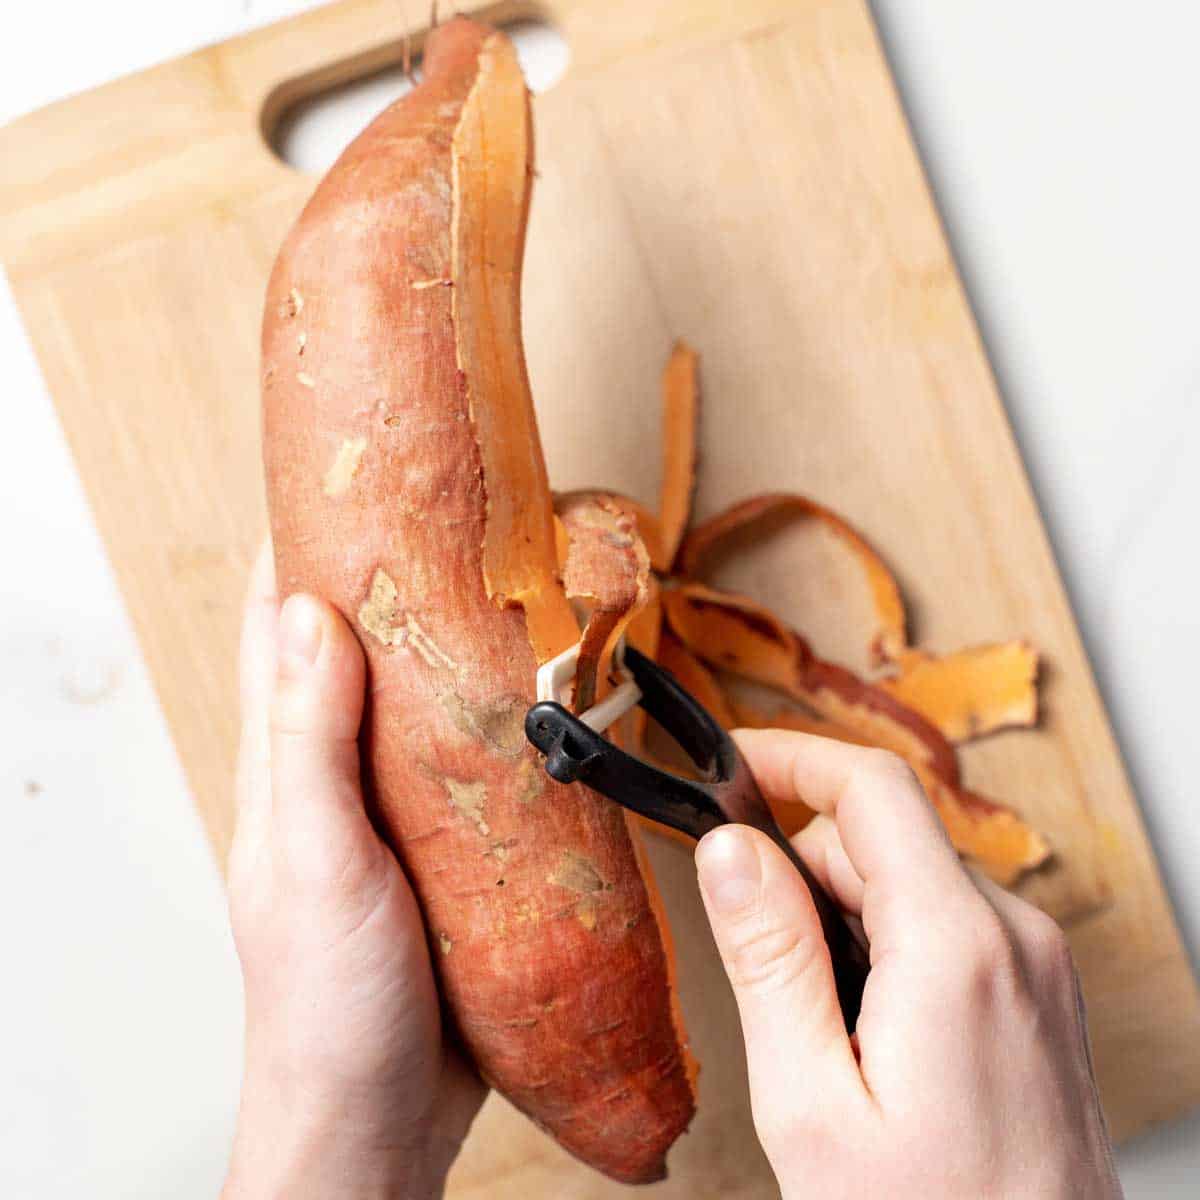 hand holding a sweet potato and another hand peeling the sweet potato with a peeler